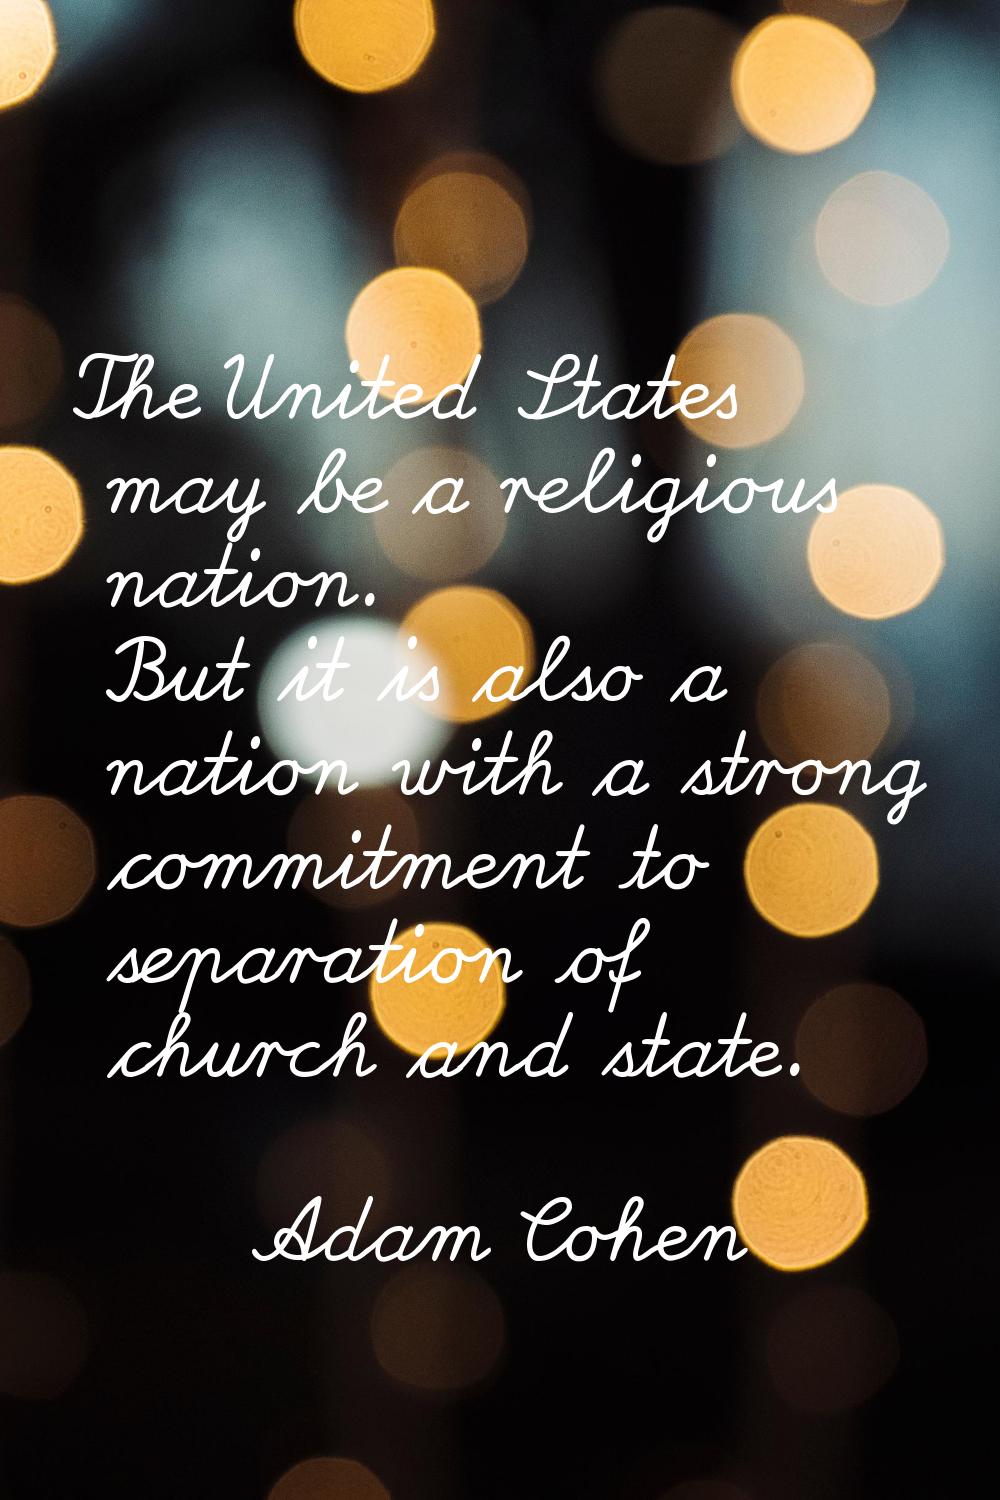 The United States may be a religious nation. But it is also a nation with a strong commitment to se